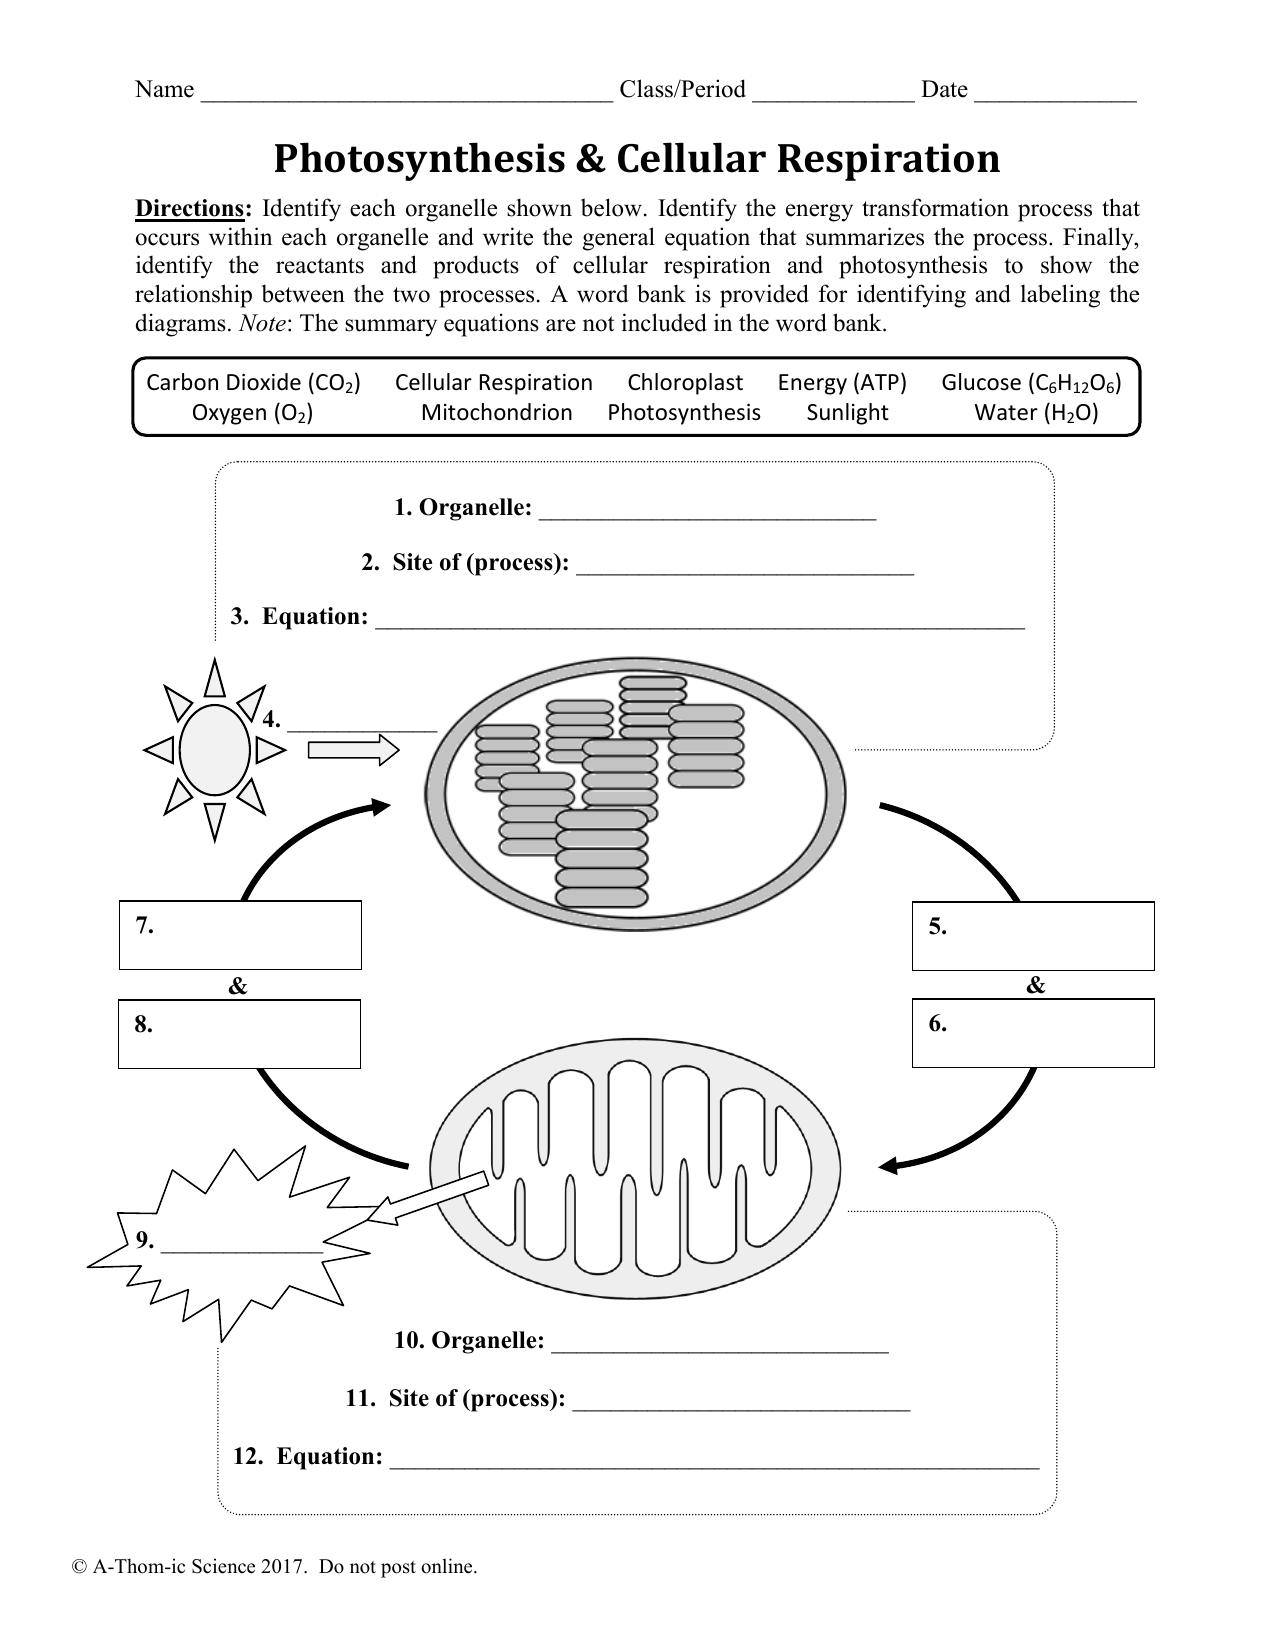 Photosynthesis and Cellular Respiration Worksheet For Photosynthesis And Respiration Worksheet Answers